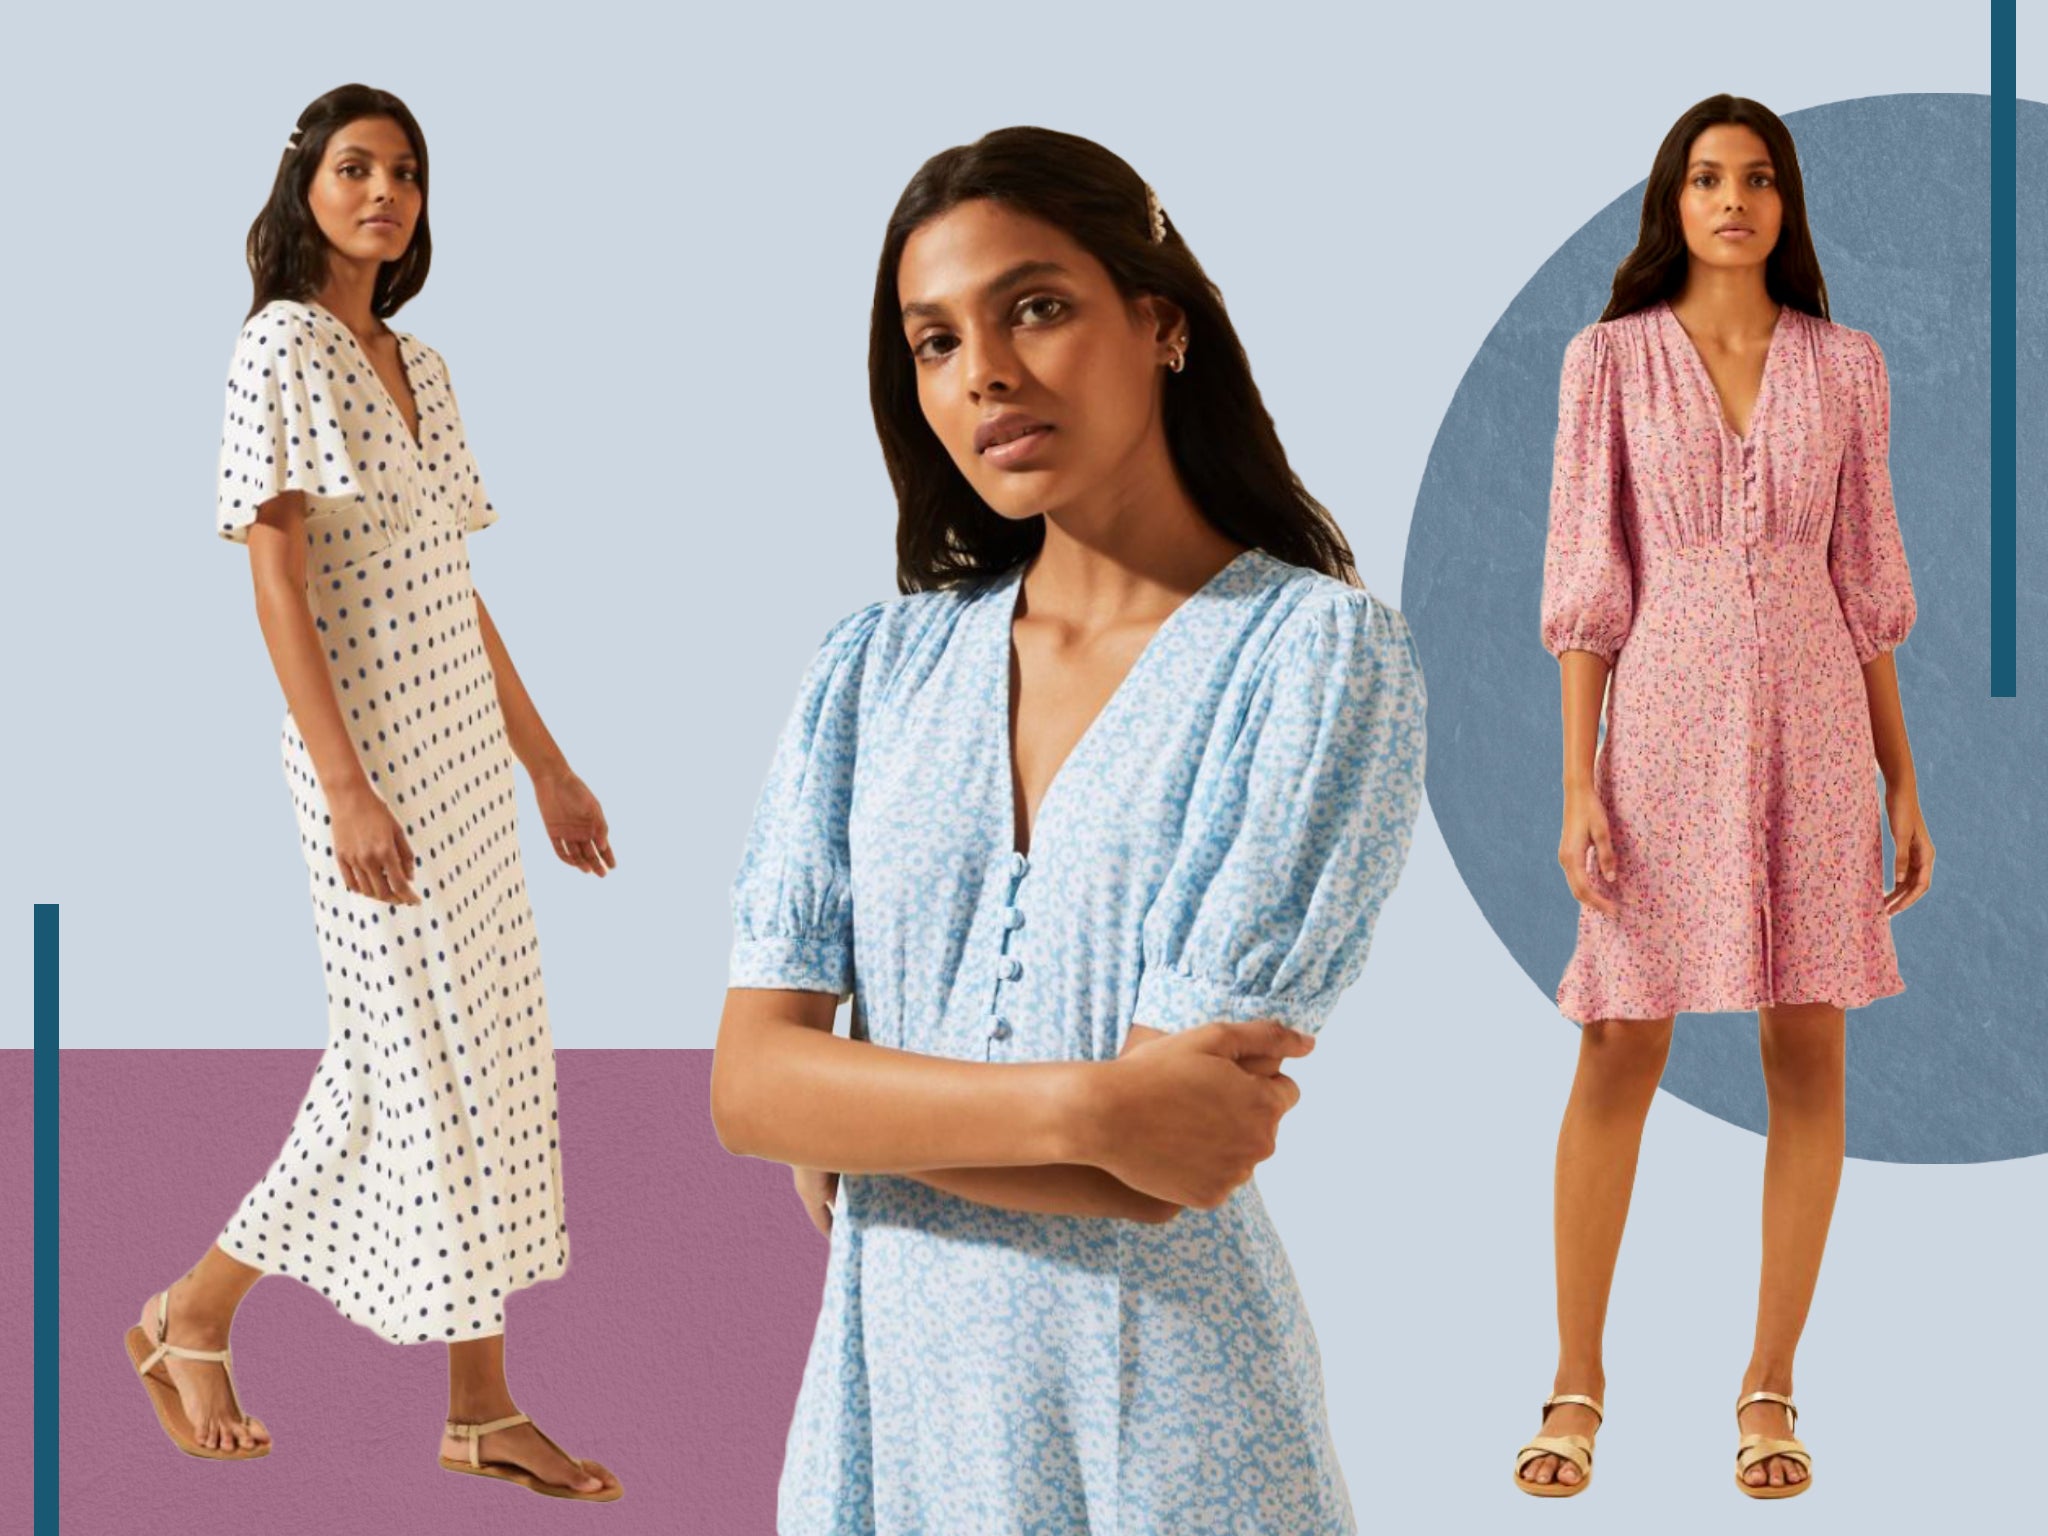 Ghost at Marks ☀ Spencers: Dresses to ...